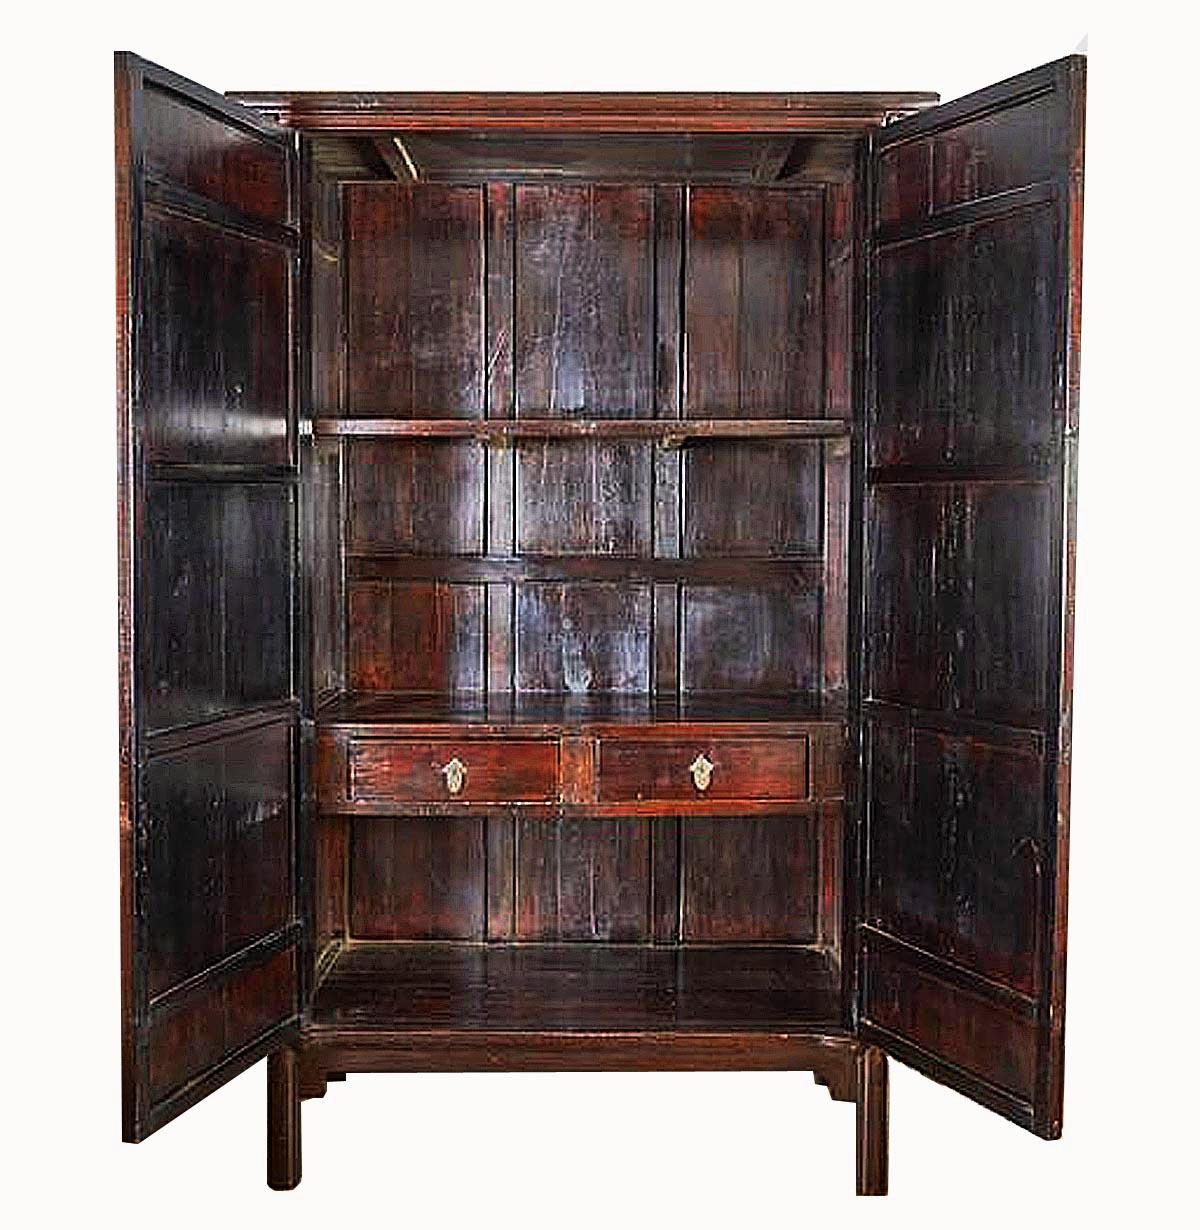 A tall mahogany cabinet, circa 1900, from China. Deep red stained, two drawers, top and bottom shelves, corner legs and original bronze hardware. Very good condition. 
